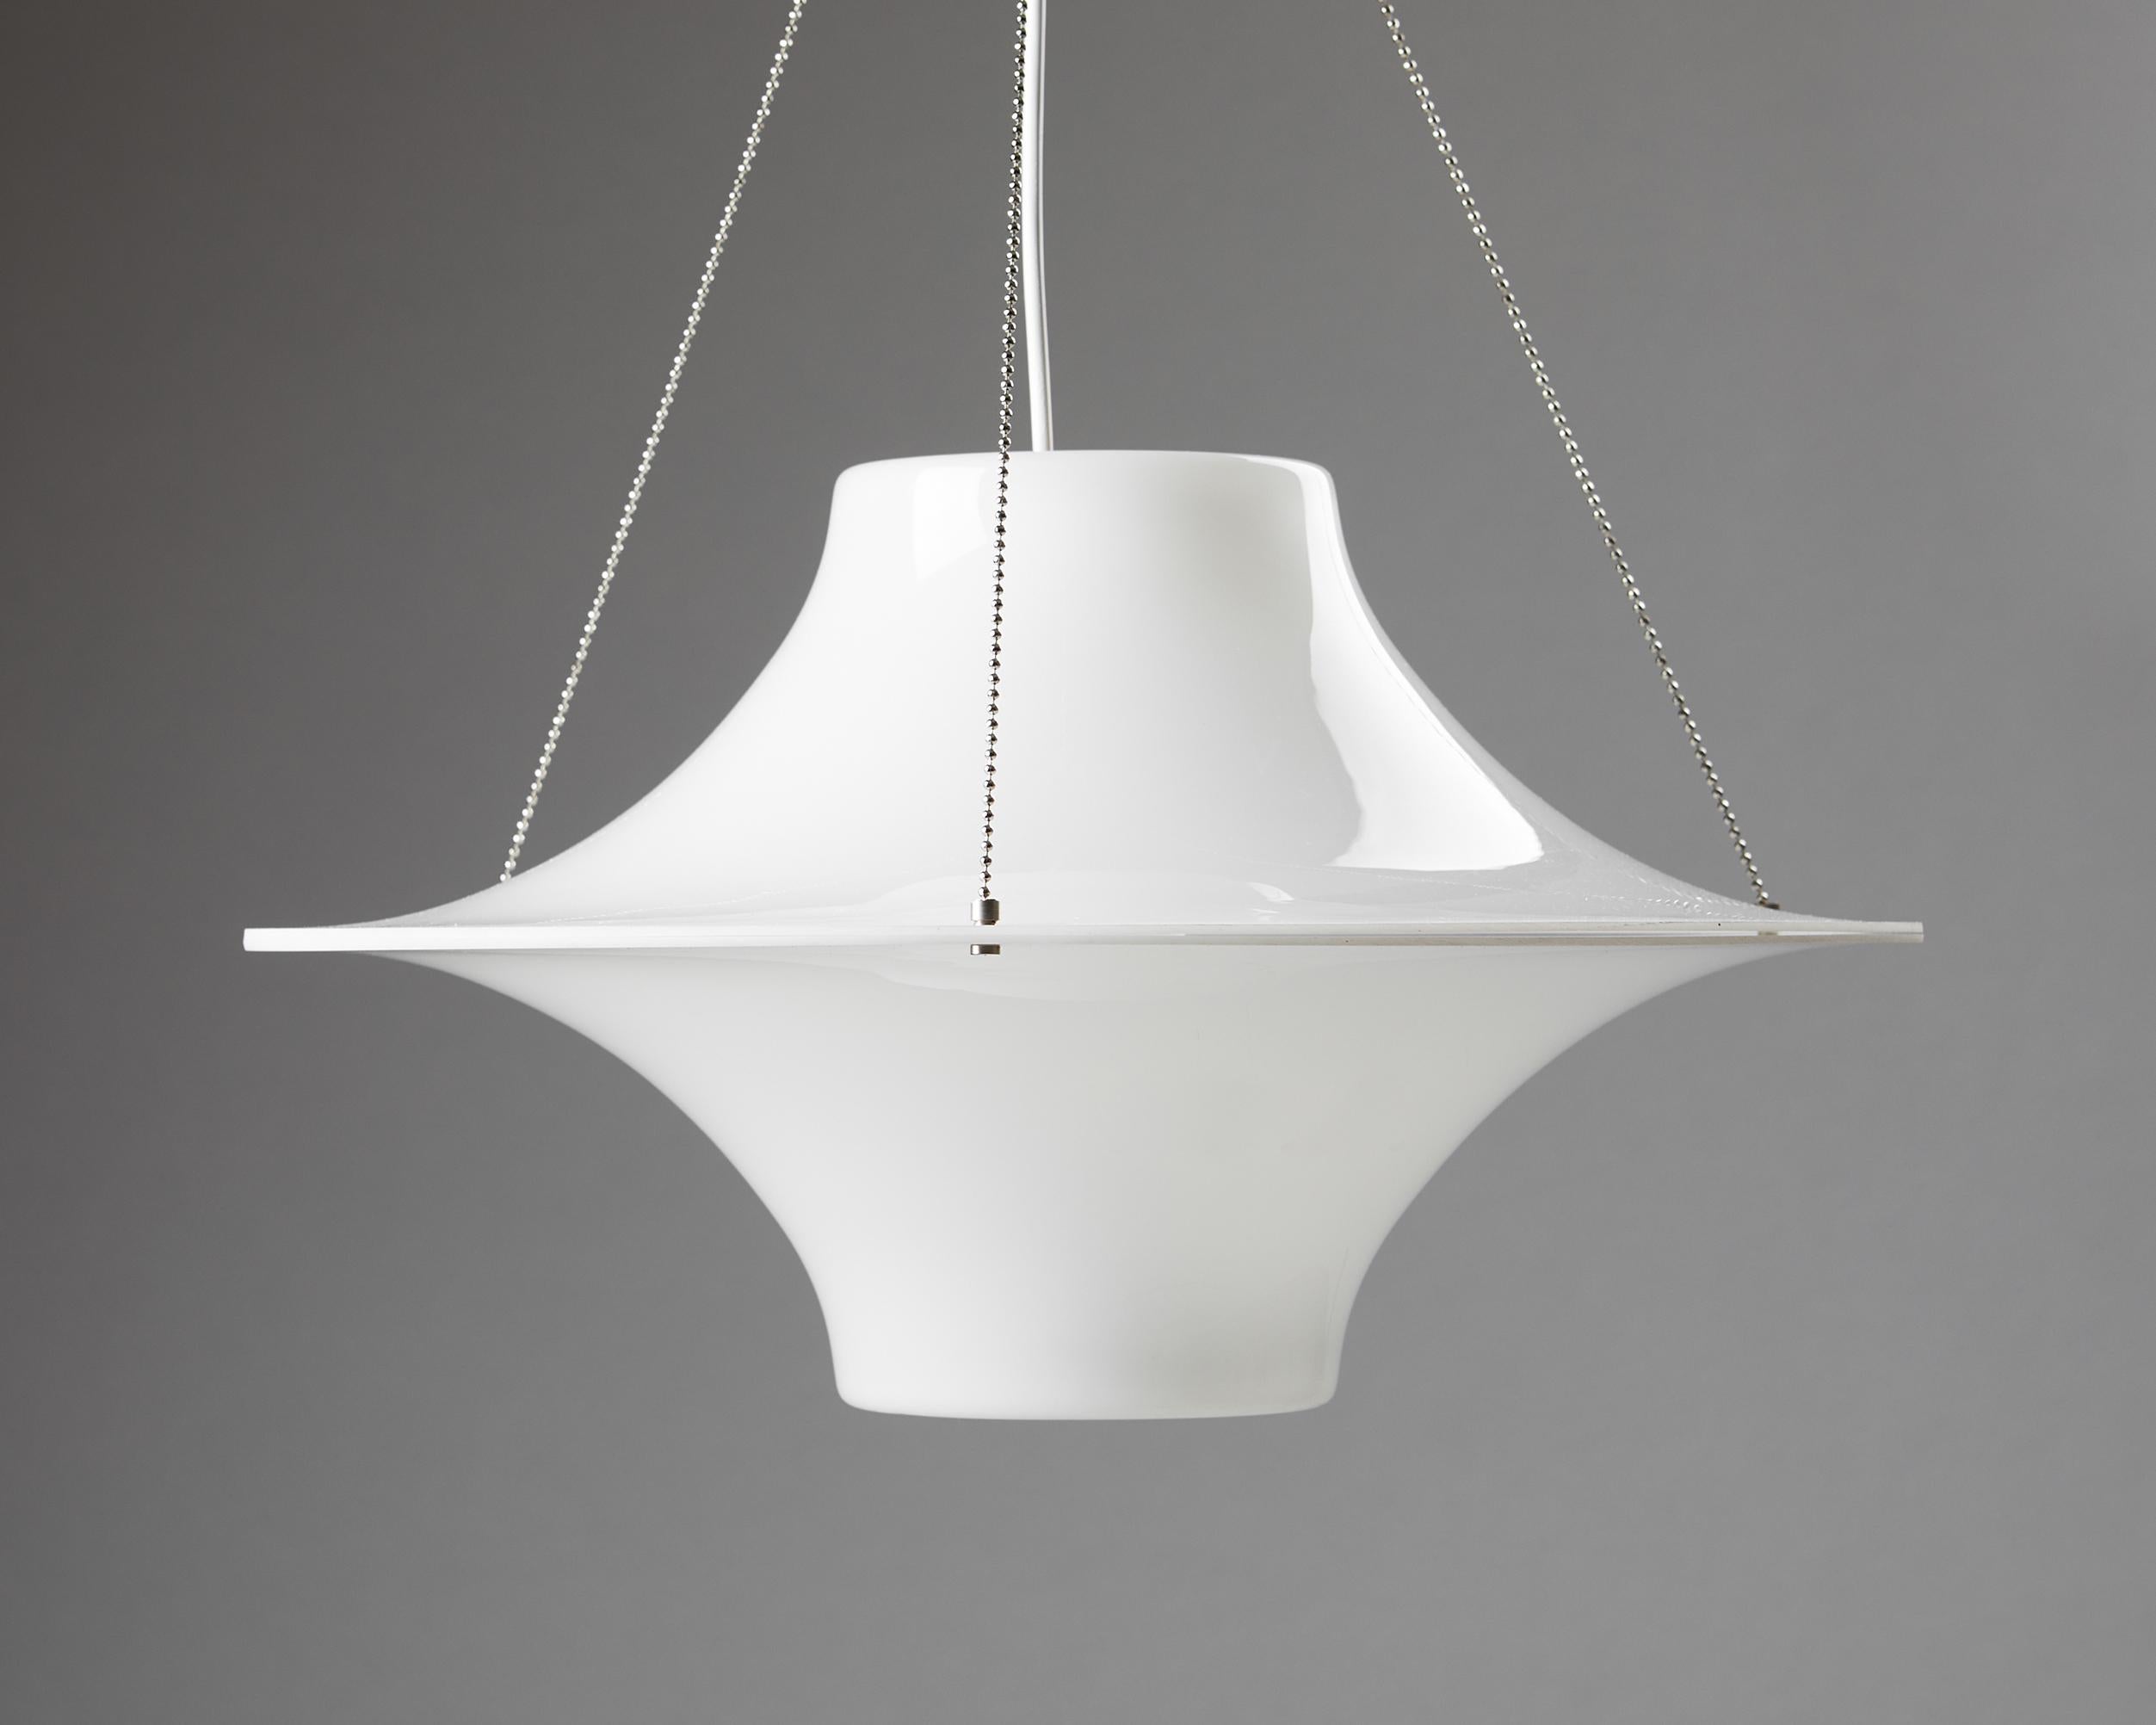 Ceiling lamp ‘Sky Flyer’ designed by Yki Nummi,
Finland. 1960s.
Acrylic and steel.

Adjustable drop height.

This pendant is one of the best-known Finnish lamp designs. Yuki Nummi created sculptural pieces using modern materials, such as